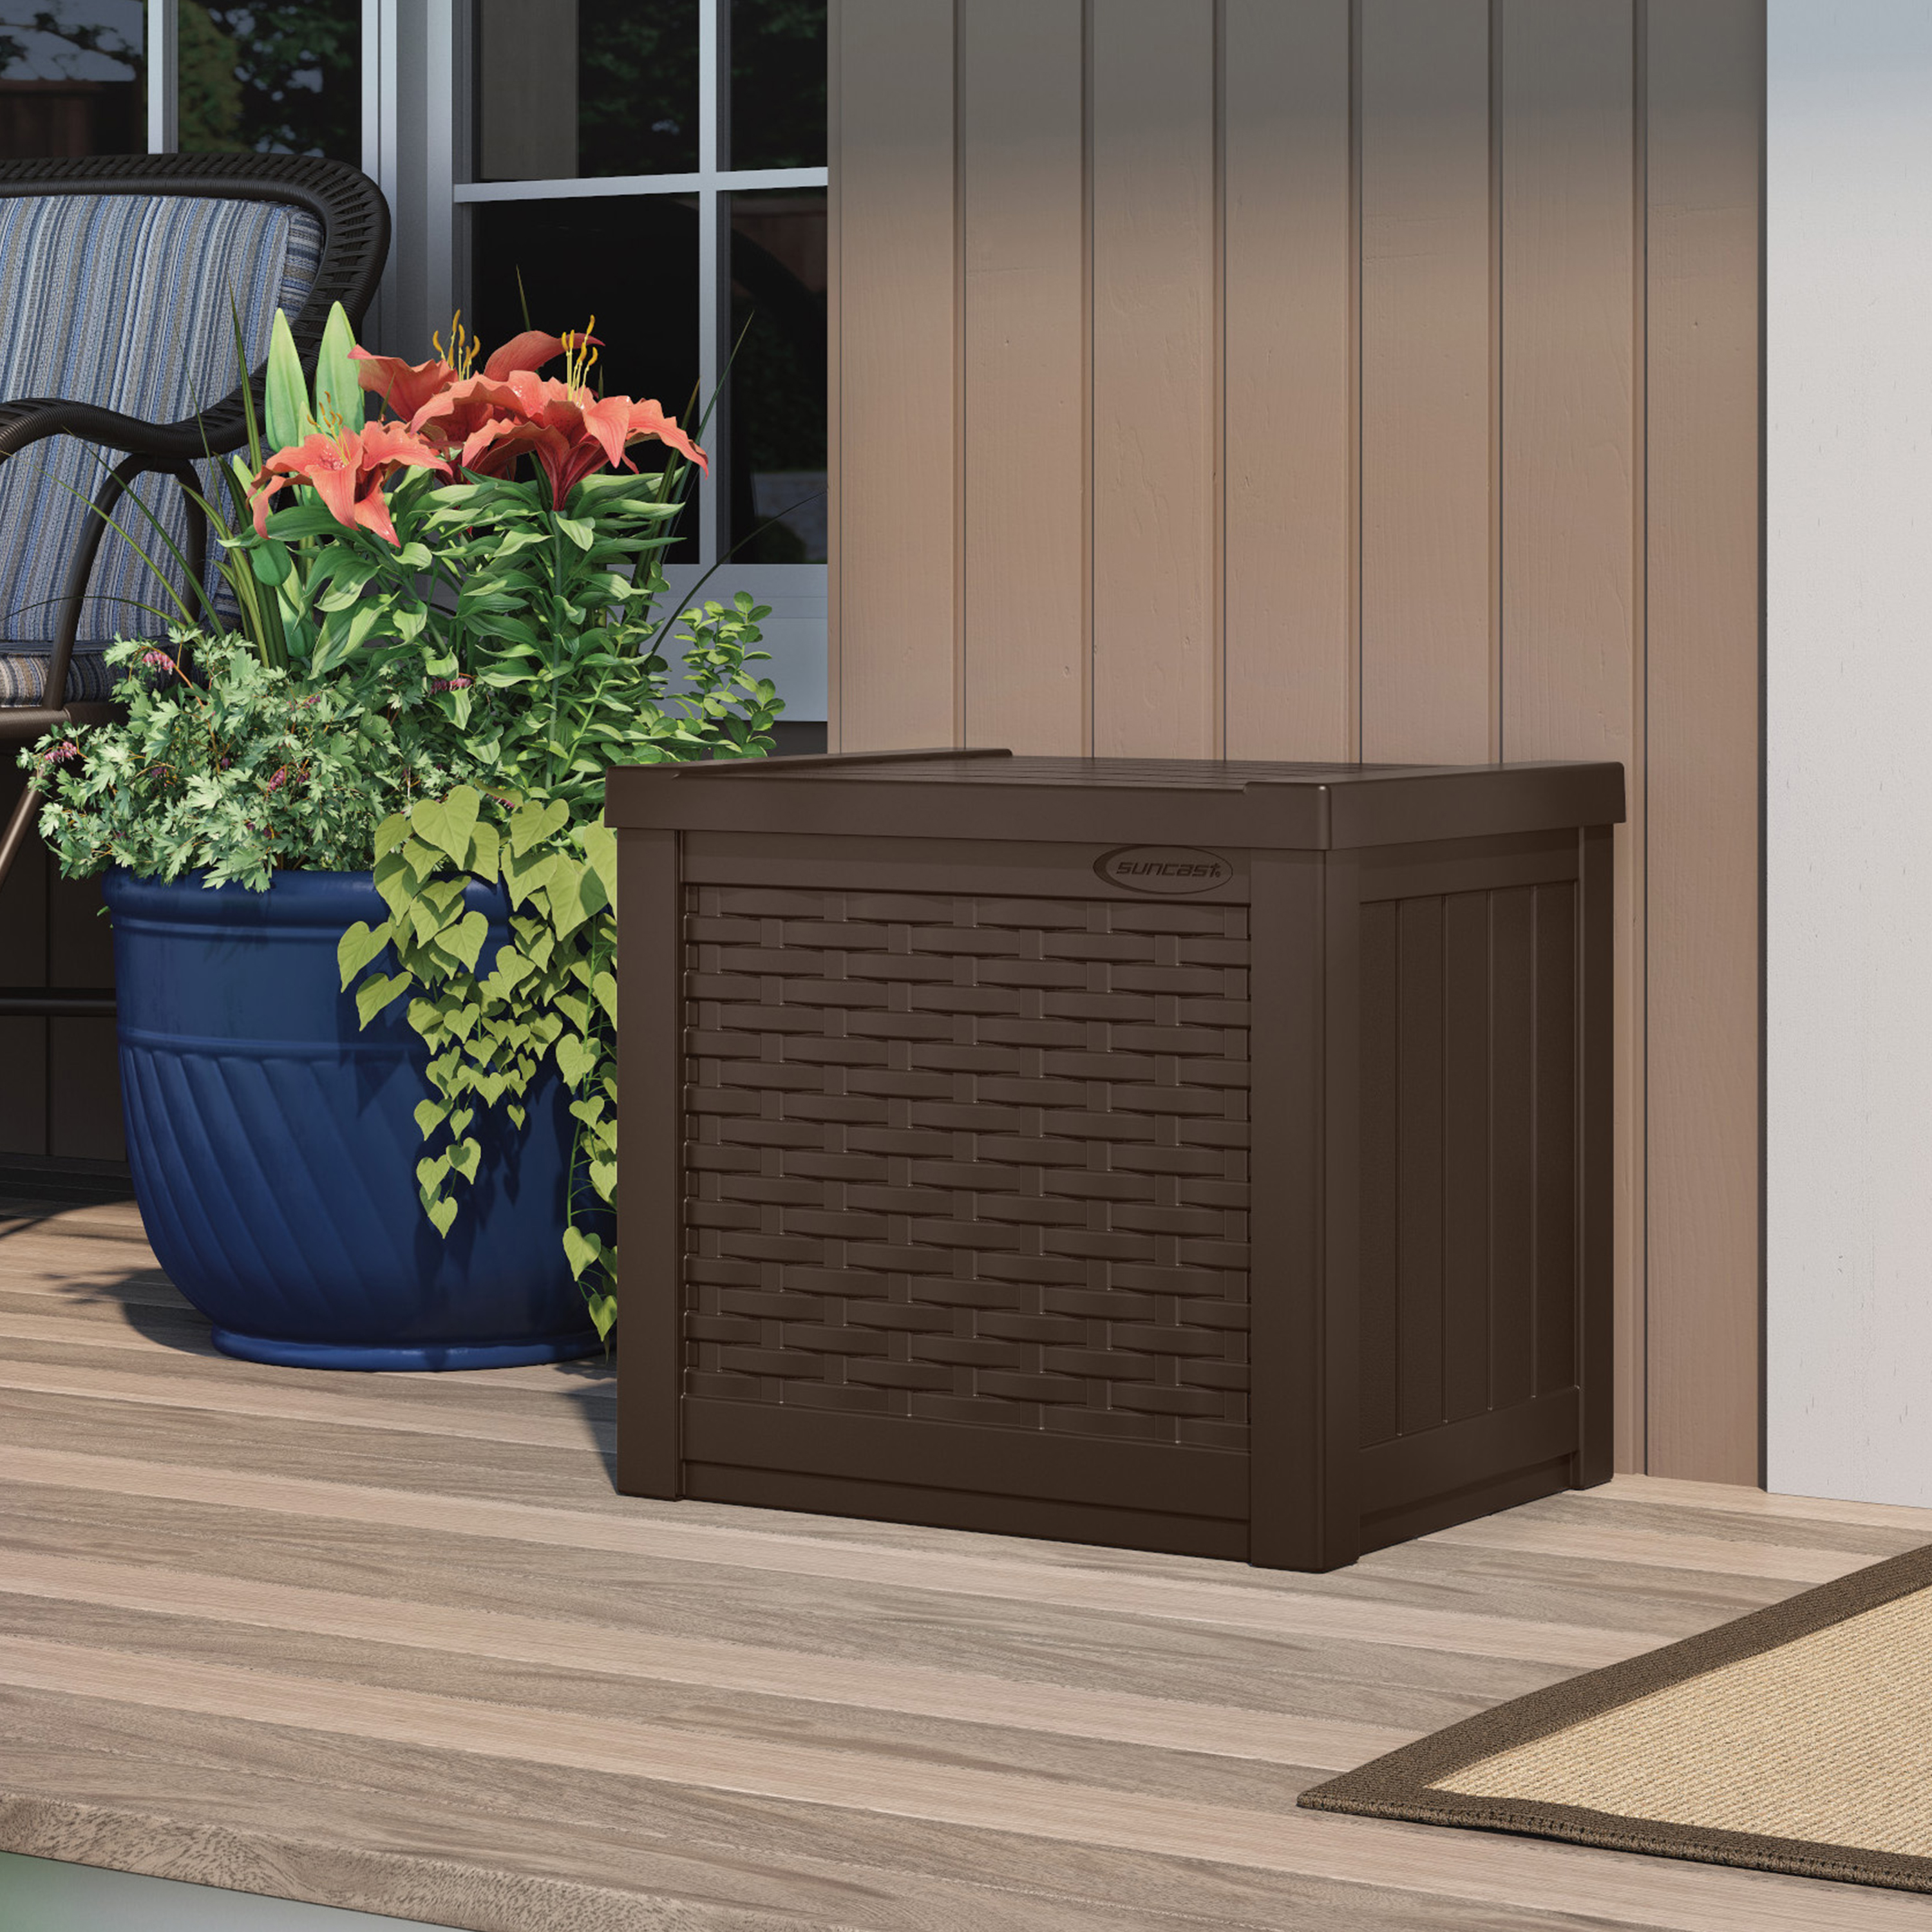 Suncast 22 Gal Outdoor Patio Small Deck Box w/ Storage Seat, Java (2 Pack) - image 3 of 10